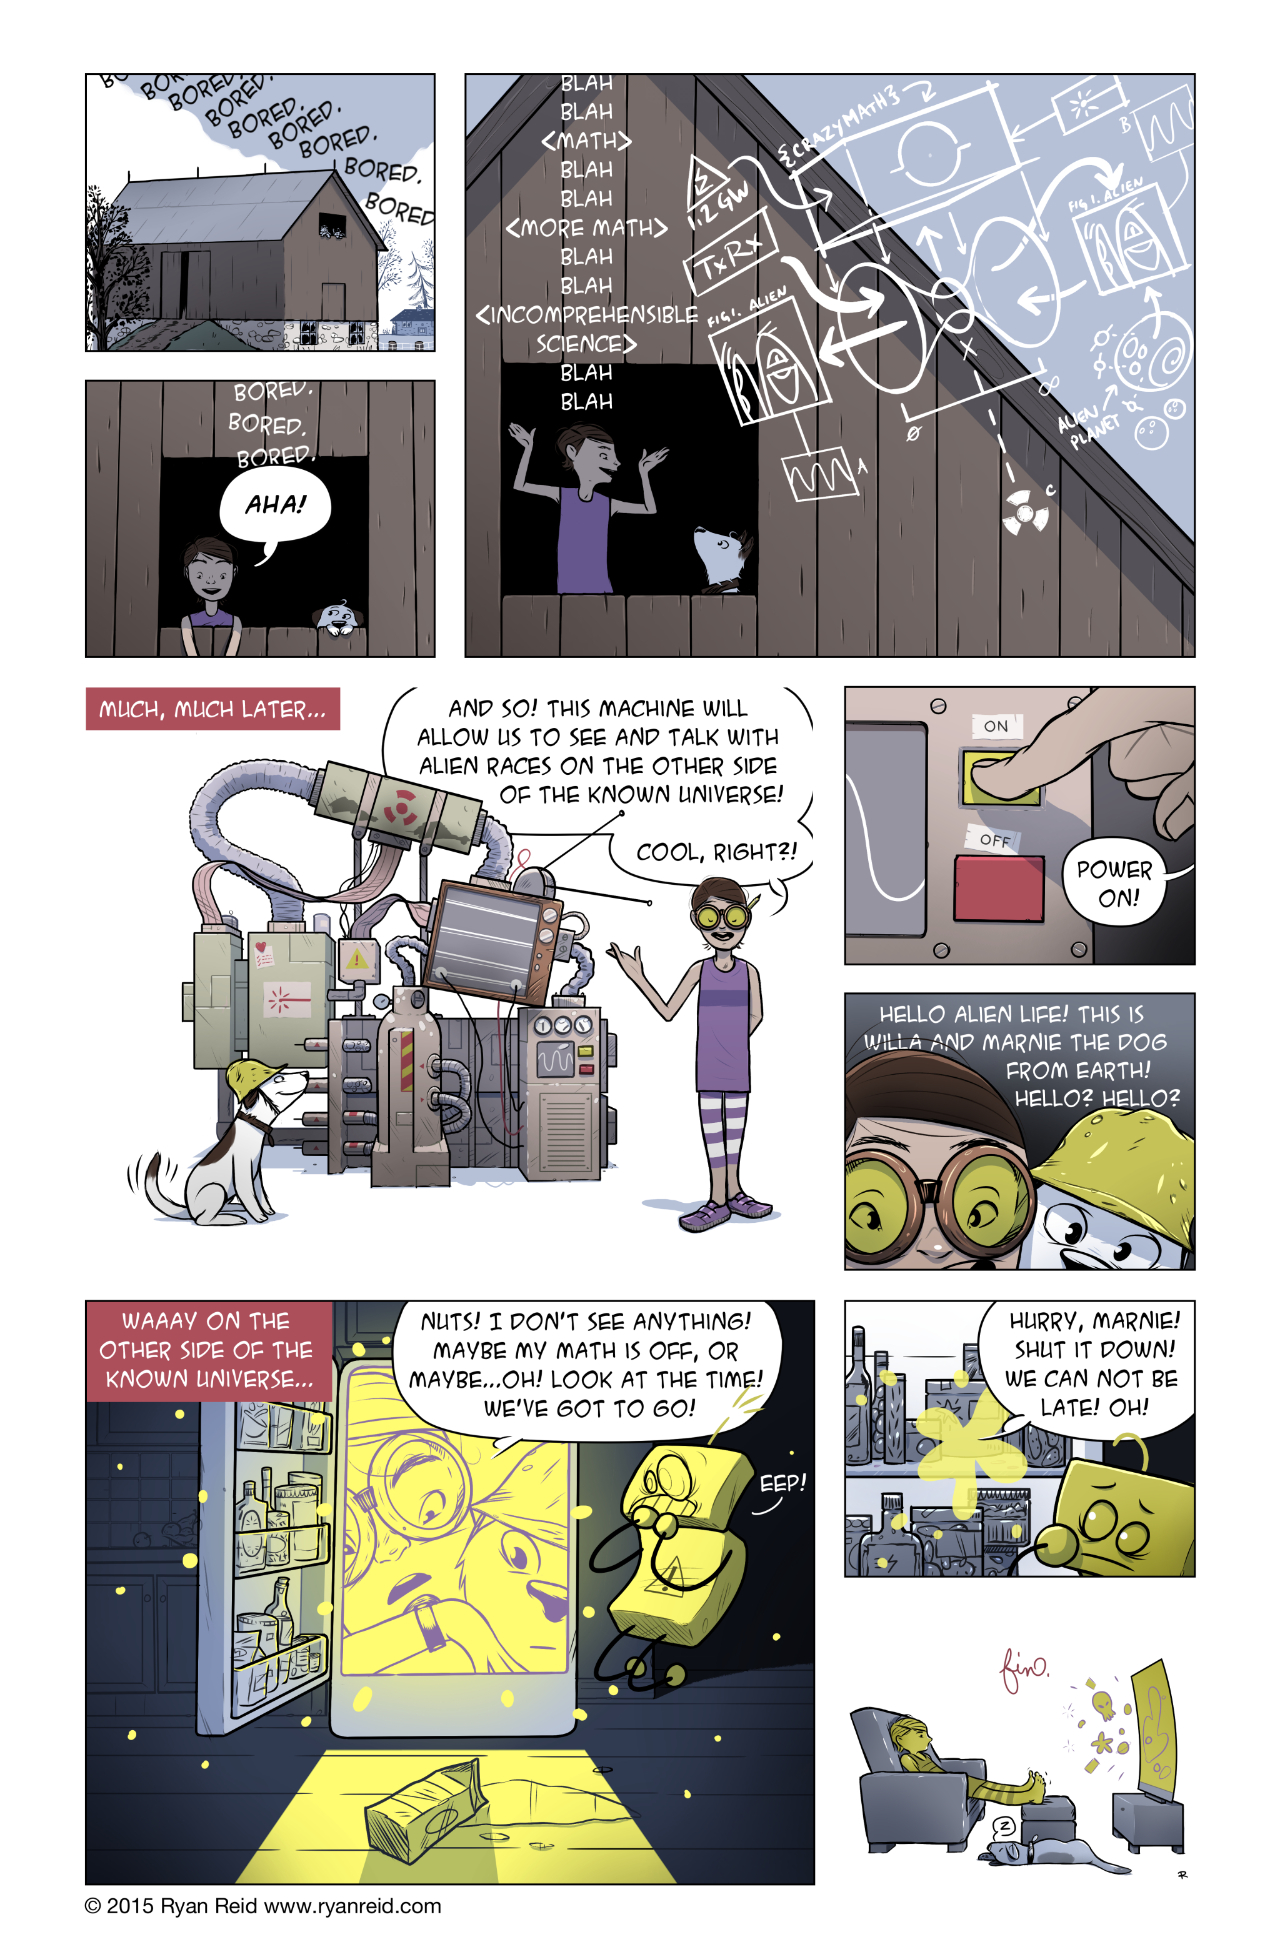 In this comic, Willa and her dog Marnie build a machine to communicate with aliens. It doesn’t go as expected.